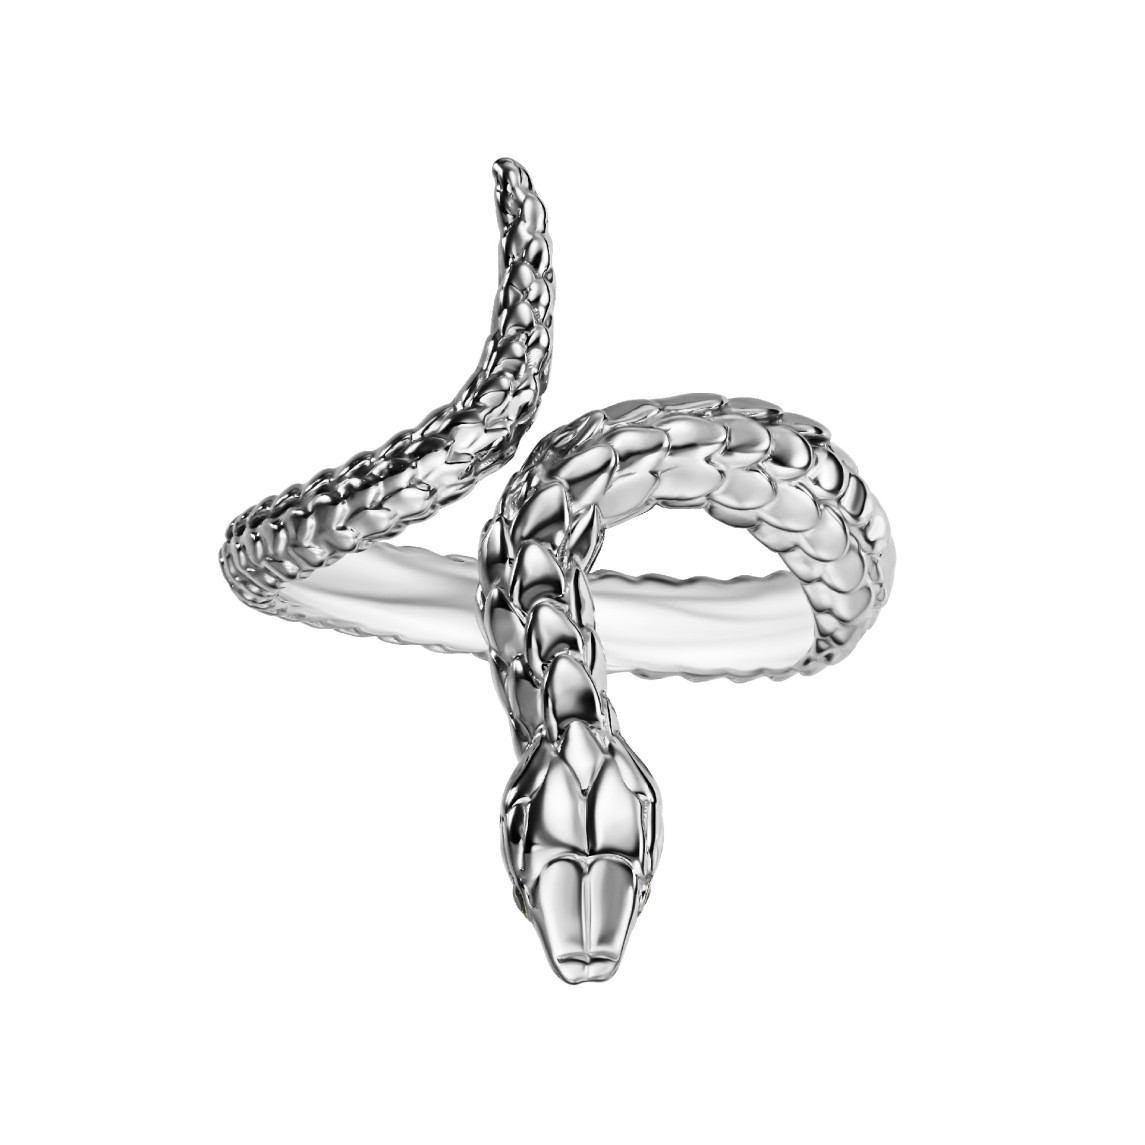 White Gold Snake Ring With Green Diamonds